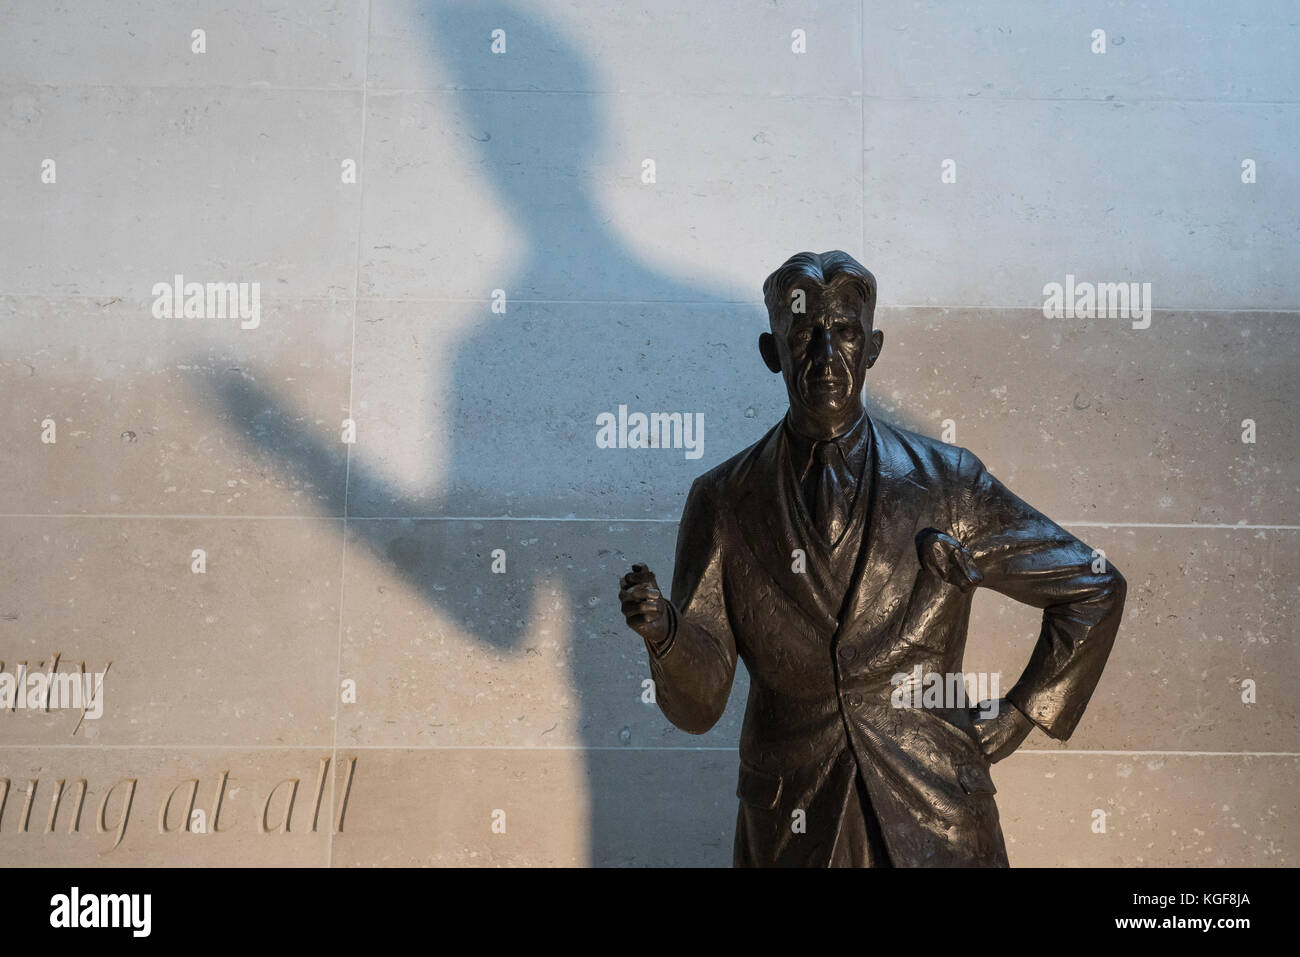 London, UK.  7 November 2017.  A statue of author George Orwell is unveiled outside the BBC headquarters in Portland Place.  Accompanying the statue is an inscription which reads 'If liberty means anything at all it means the right to tell people what they do not want to hear'.  Credit: Stephen Chung / Alamy Live News Stock Photo